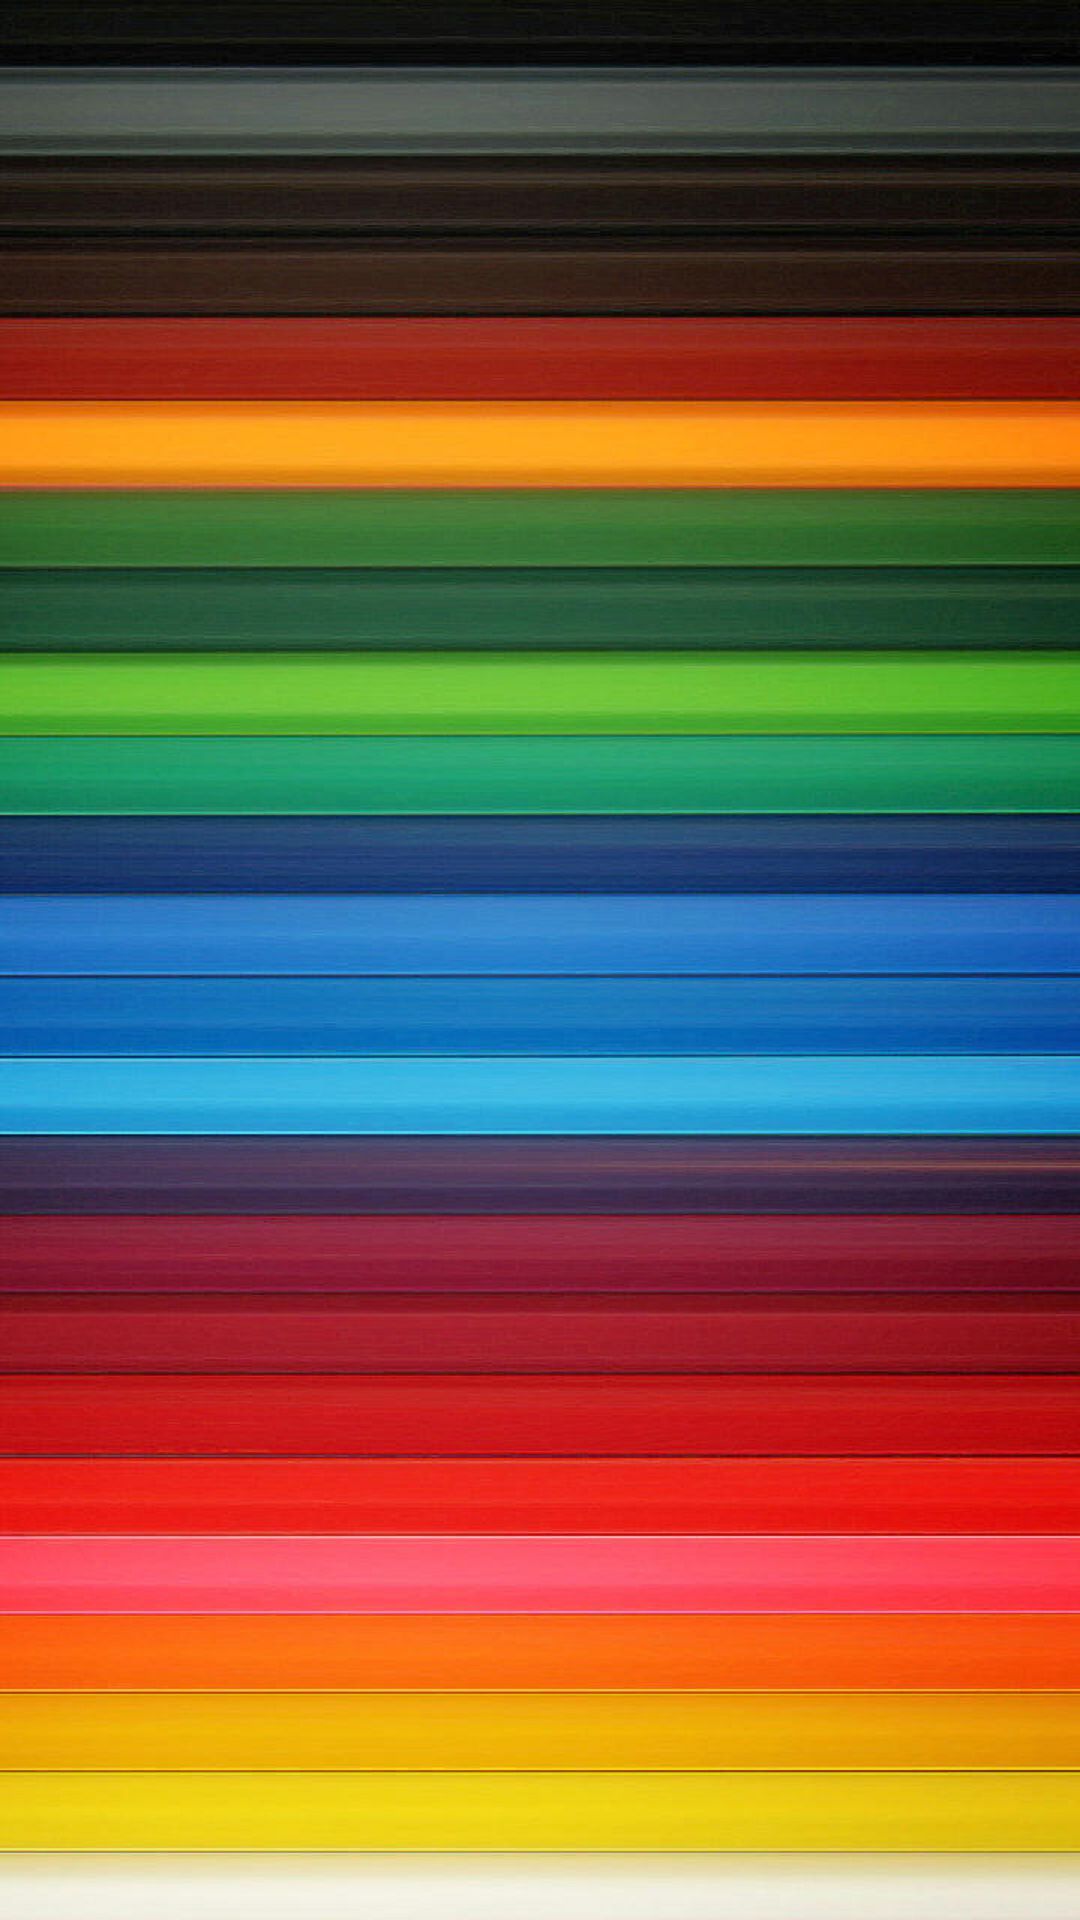 creative hd wallpapers for mobile,blue,green,colorfulness,line,yellow